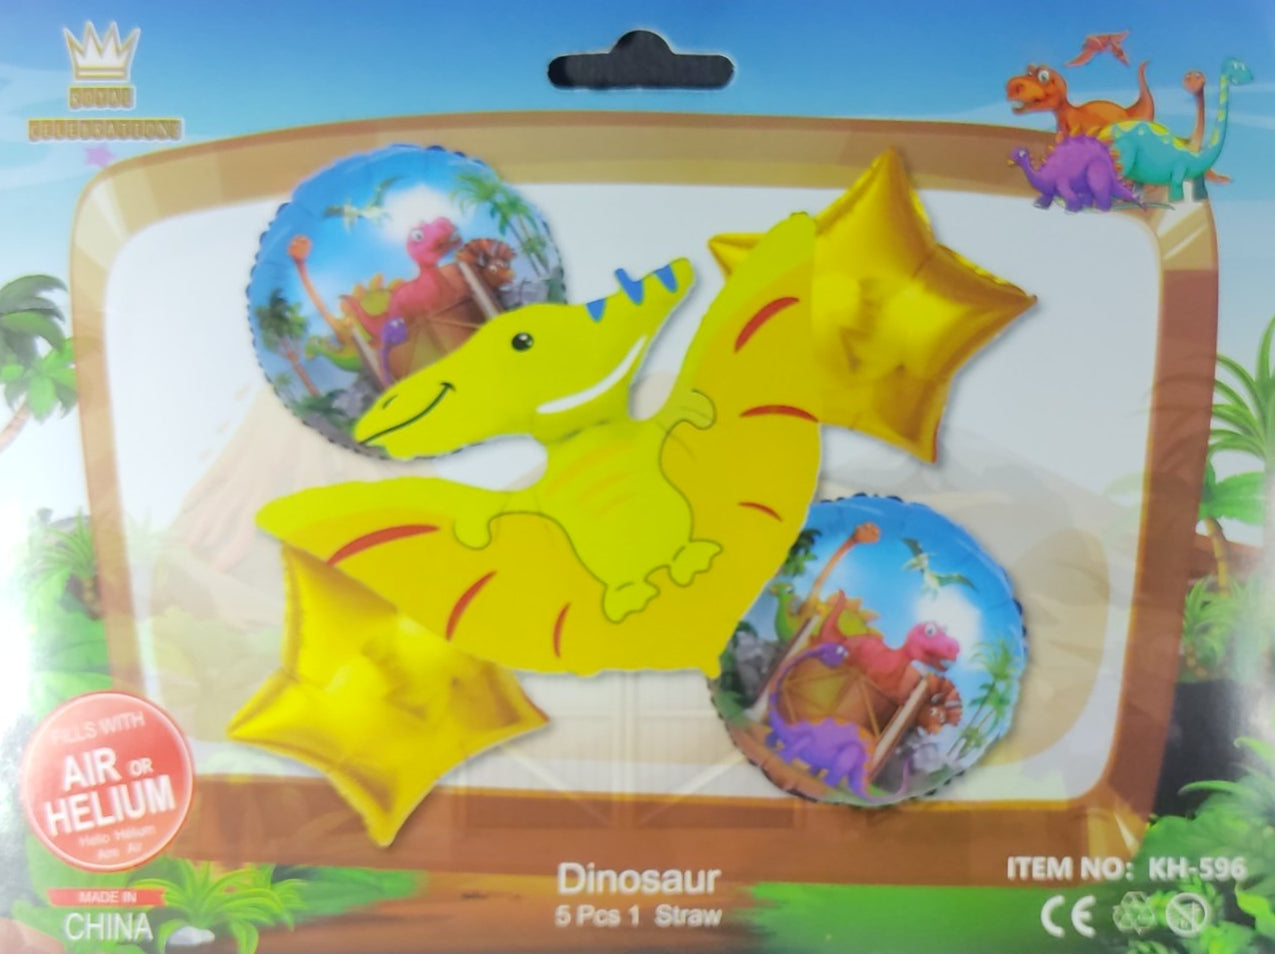 Yellow Dinosaur Foil Balloon - 5 pieces set for Simple Birthday Decorations at Home